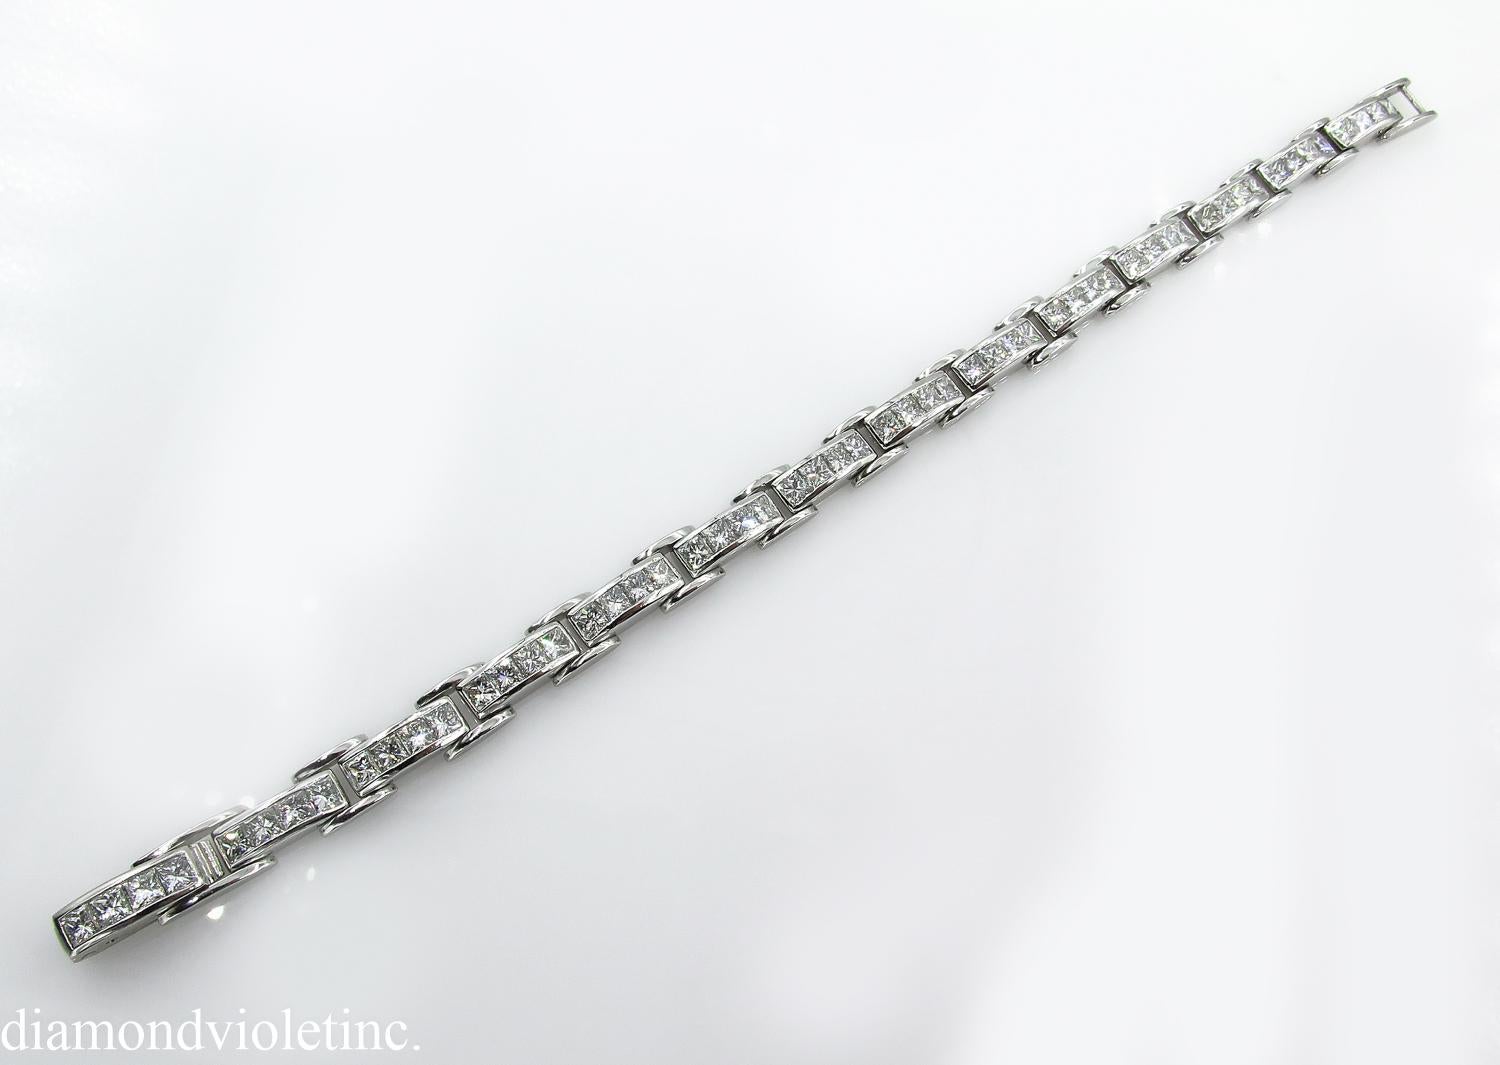 An Amazing Estate Diamond Handmade Platinum (stamped) Tennis Bracelet with over 56 Princess cut Diamonds in F-G color, VS clarity over all; estimated total weight of the diamonds is 9.25ctw, Gemologic appraised.
The length of the bracelet is 7